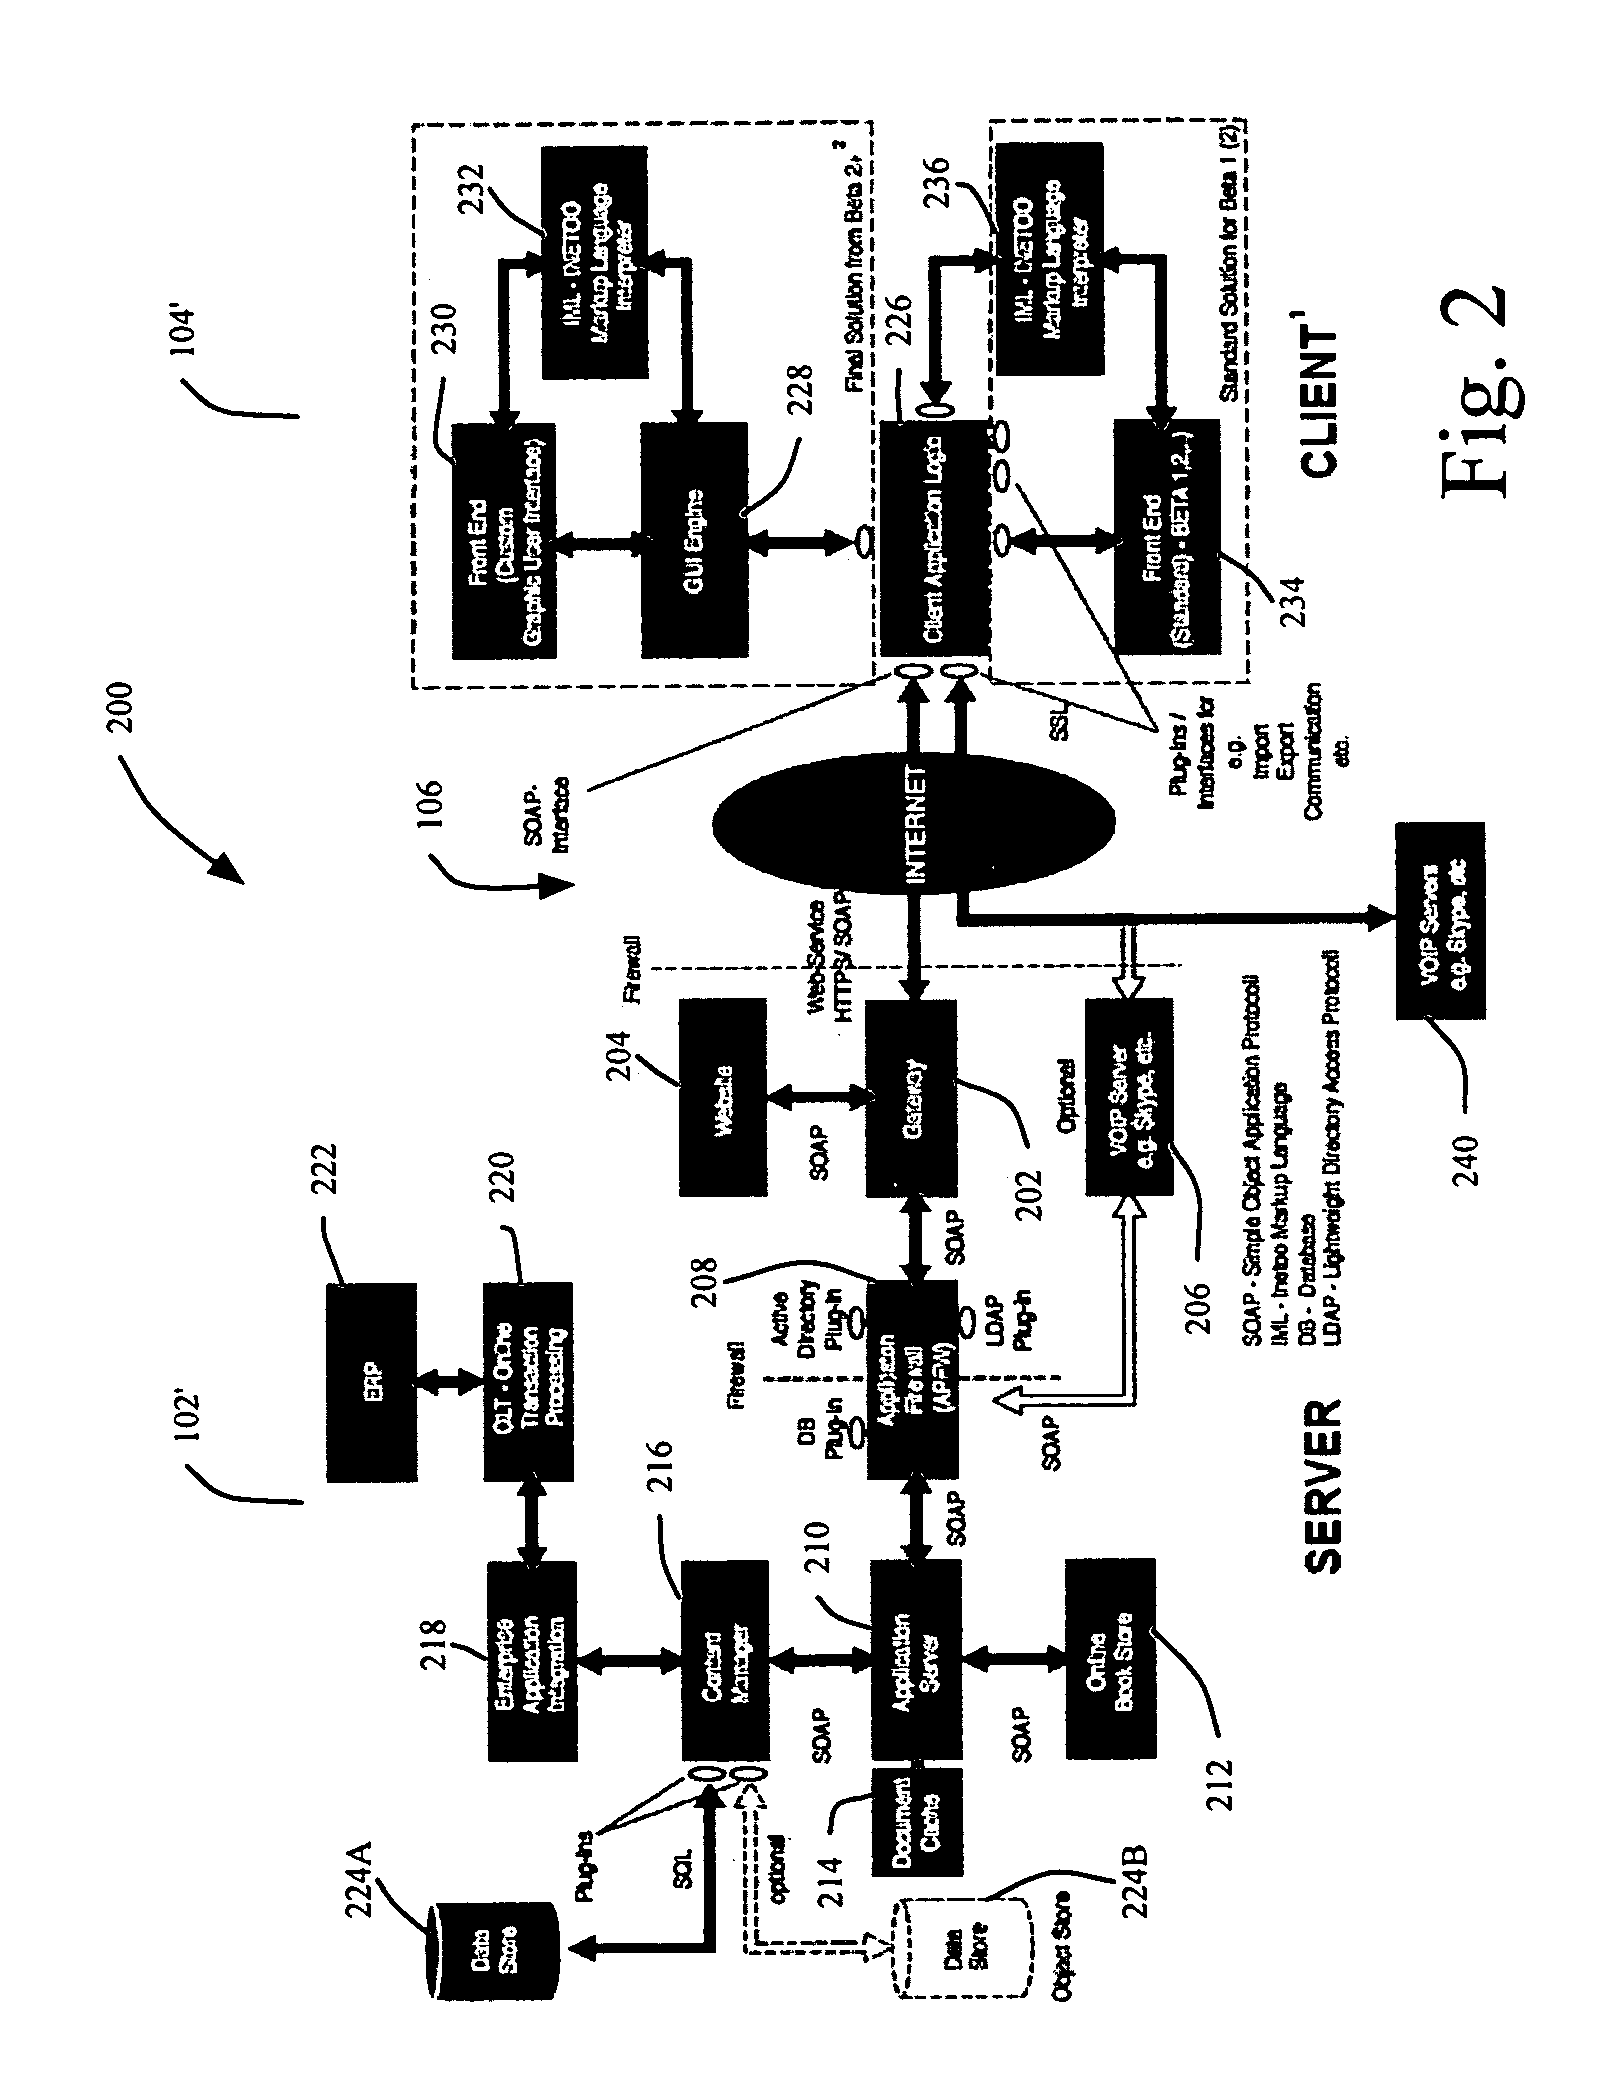 Methods and systems for facilitating the distribution, sharing, and commentary of electronically published materials